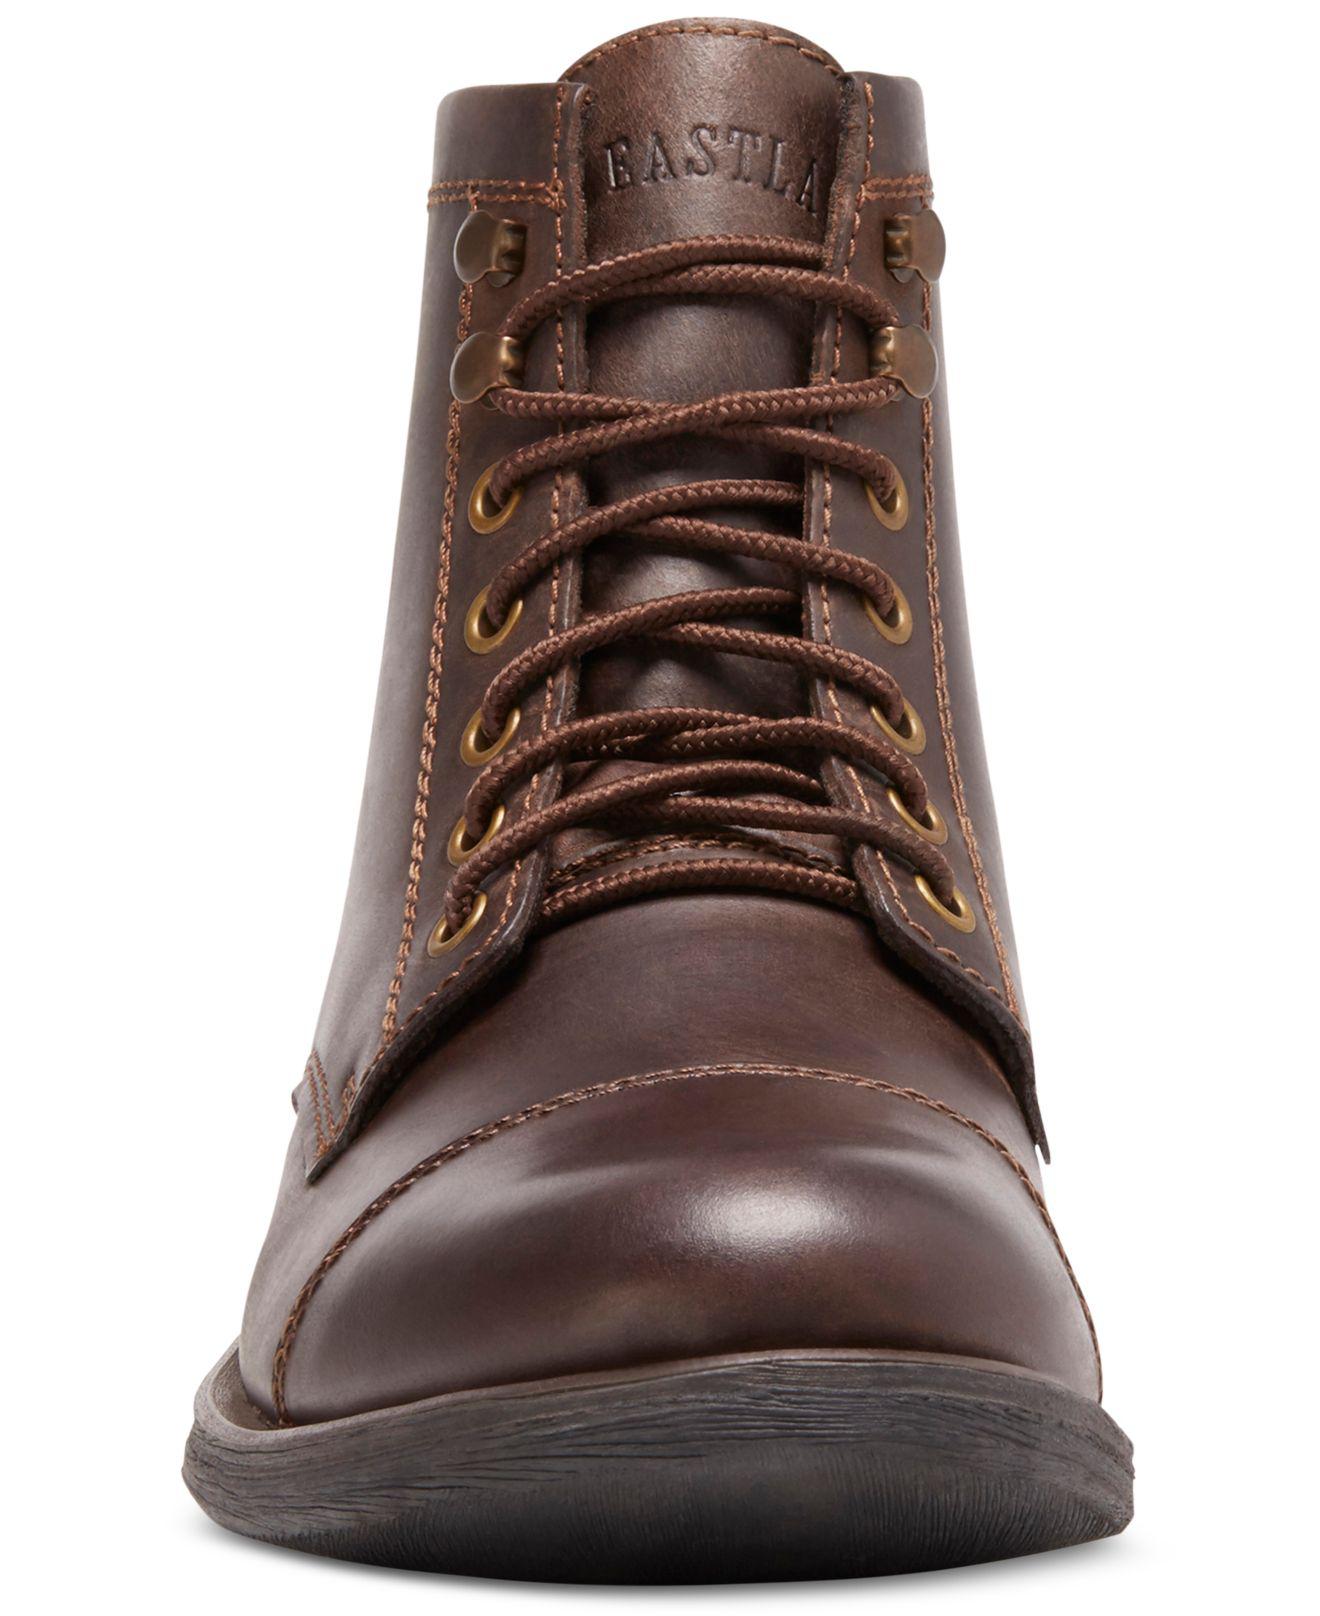 Eastland Leather Eastland High Fidelity Lace-up Boots in Dark Brown ...